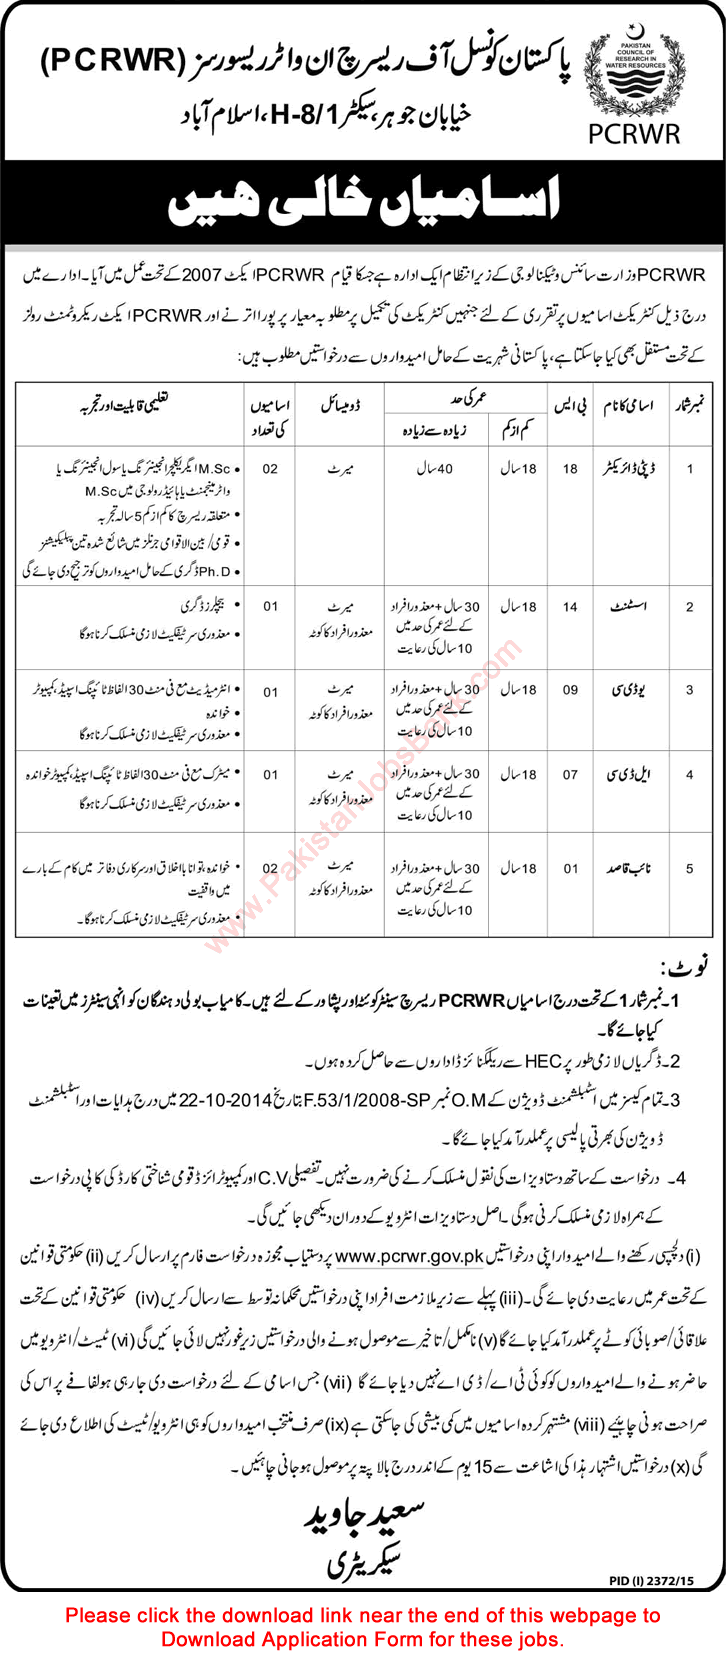 Pakistan Council of Research in Water Resources Jobs 2015 November PCRWR Application Form Download